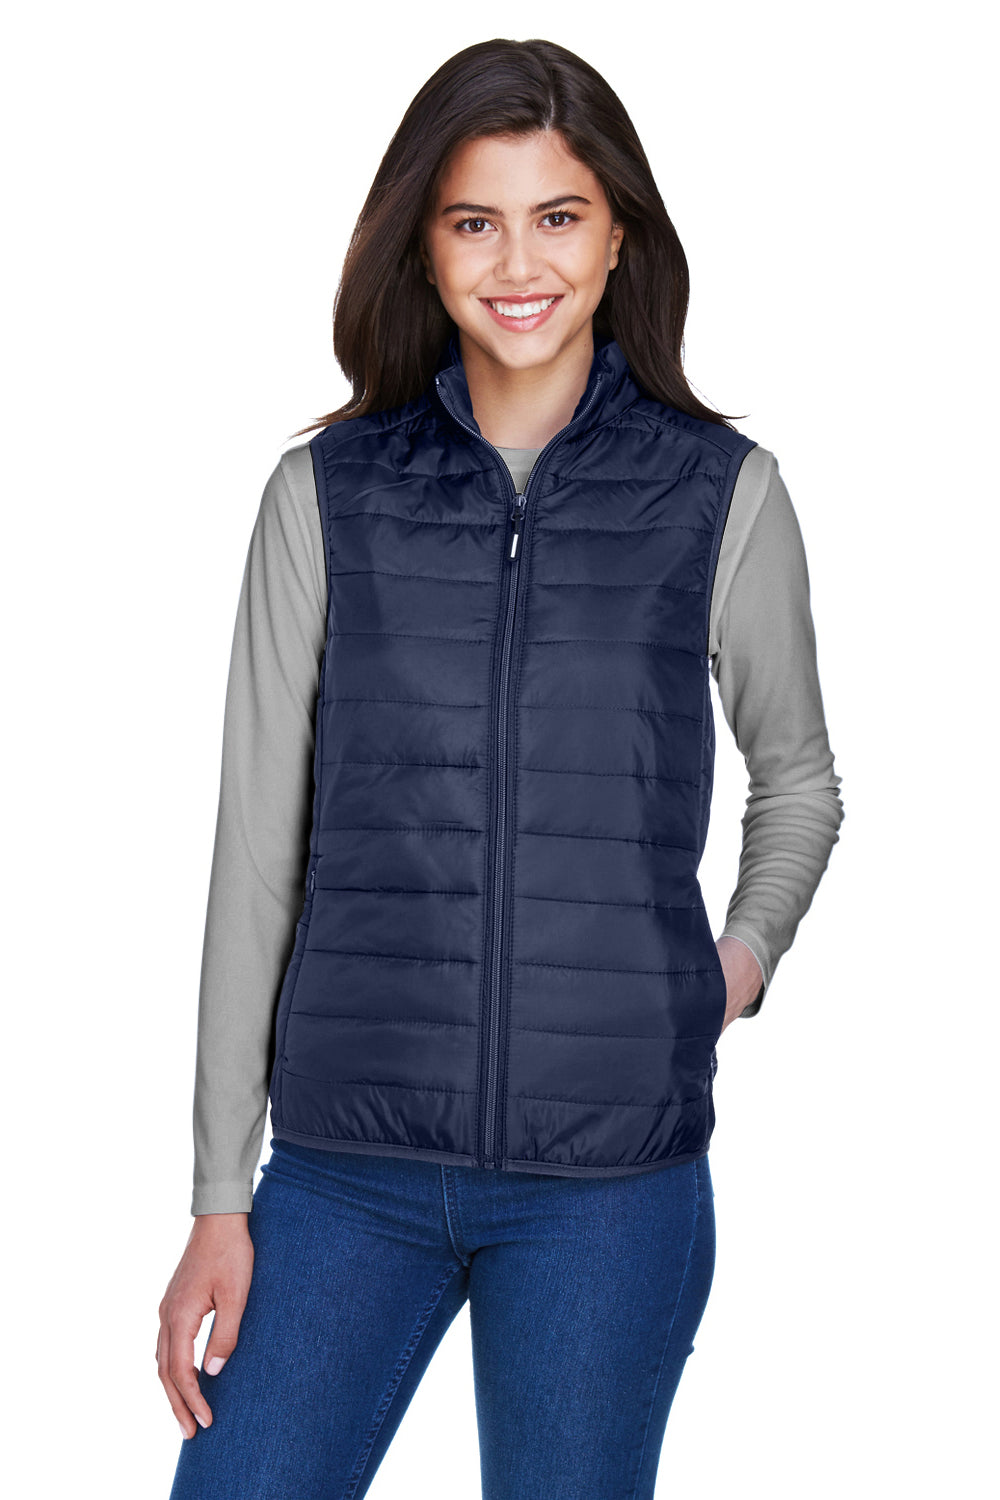 Core 365 CE702W Womens Prevail Packable Puffer Water Resistant Full Zip Vest Navy Blue Front